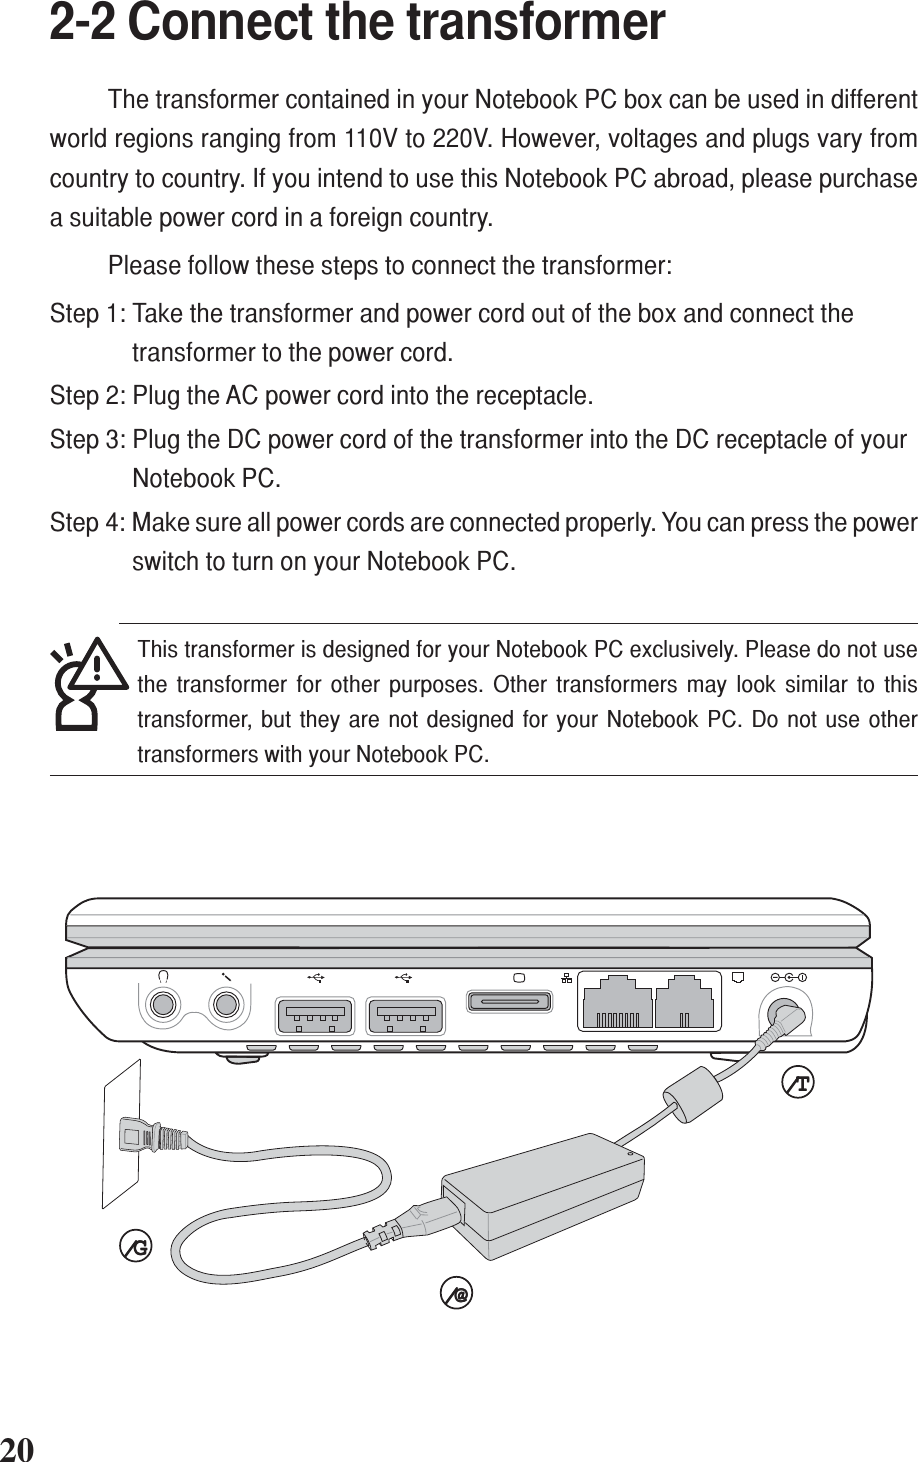 +-+-202-2 Connect the transformerThe transformer contained in your Notebook PC box can be used in differentworld regions ranging from 110V to 220V. However, voltages and plugs vary fromcountry to country. If you intend to use this Notebook PC abroad, please purchasea suitable power cord in a foreign country.Please follow these steps to connect the transformer:Step 1: Take the transformer and power cord out of the box and connect thetransformer to the power cord.Step 2: Plug the AC power cord into the receptacle.Step 3: Plug the DC power cord of the transformer into the DC receptacle of yourNotebook PC.Step 4: Make sure all power cords are connected properly. You can press the powerswitch to turn on your Notebook PC.⁄T⁄T⁄T⁄T⁄T⁄G⁄G⁄G⁄G⁄G⁄@⁄@⁄@⁄@⁄@This transformer is designed for your Notebook PC exclusively. Please do not usethe transformer for other purposes. Other transformers may look similar to thistransformer, but they are not designed for your Notebook PC. Do not use othertransformers with your Notebook PC.